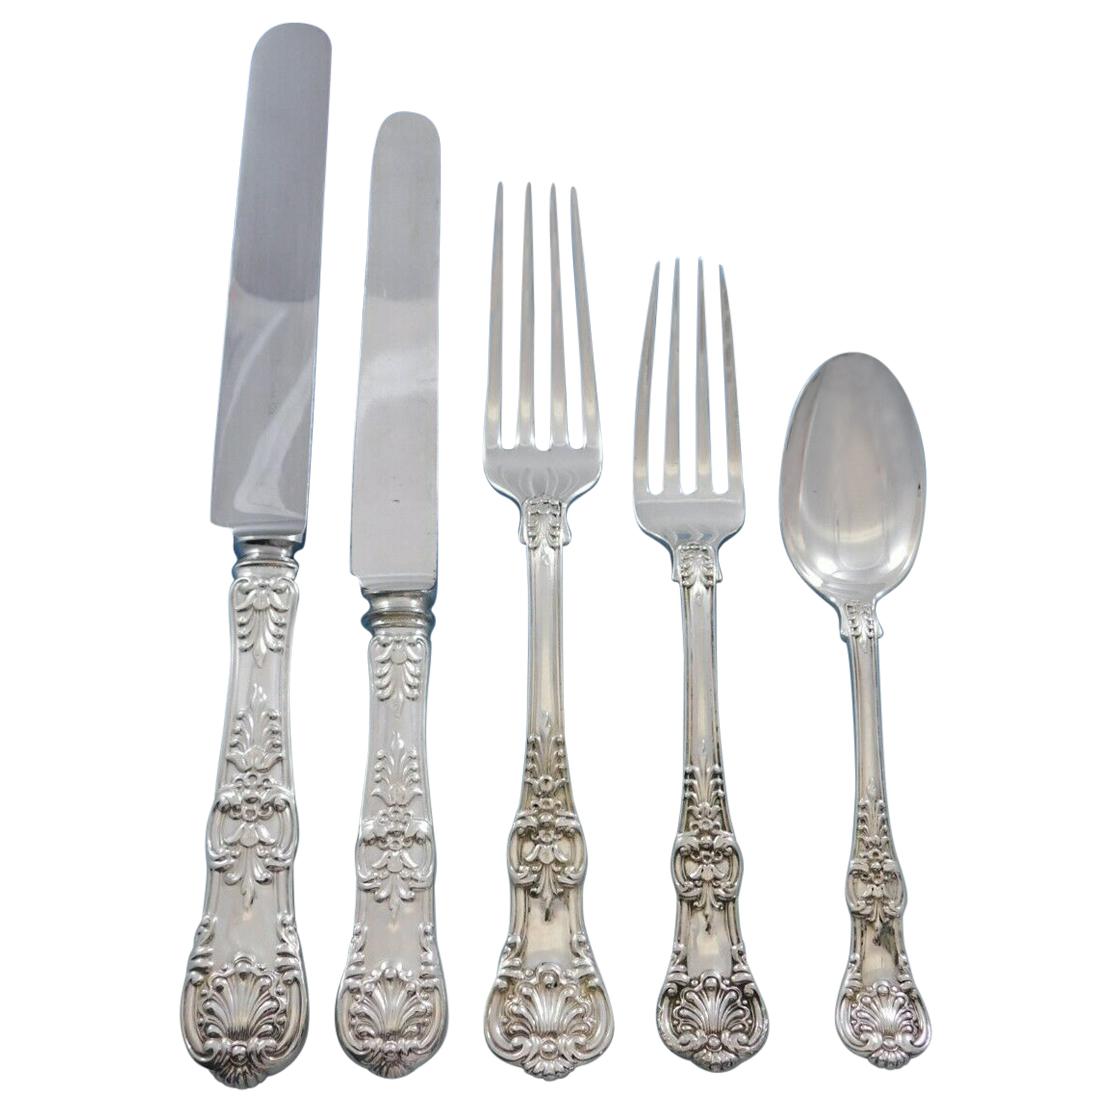 English King by Tiffany Sterling Silver Flatware Set 12 Service 60 Pieces Dinner